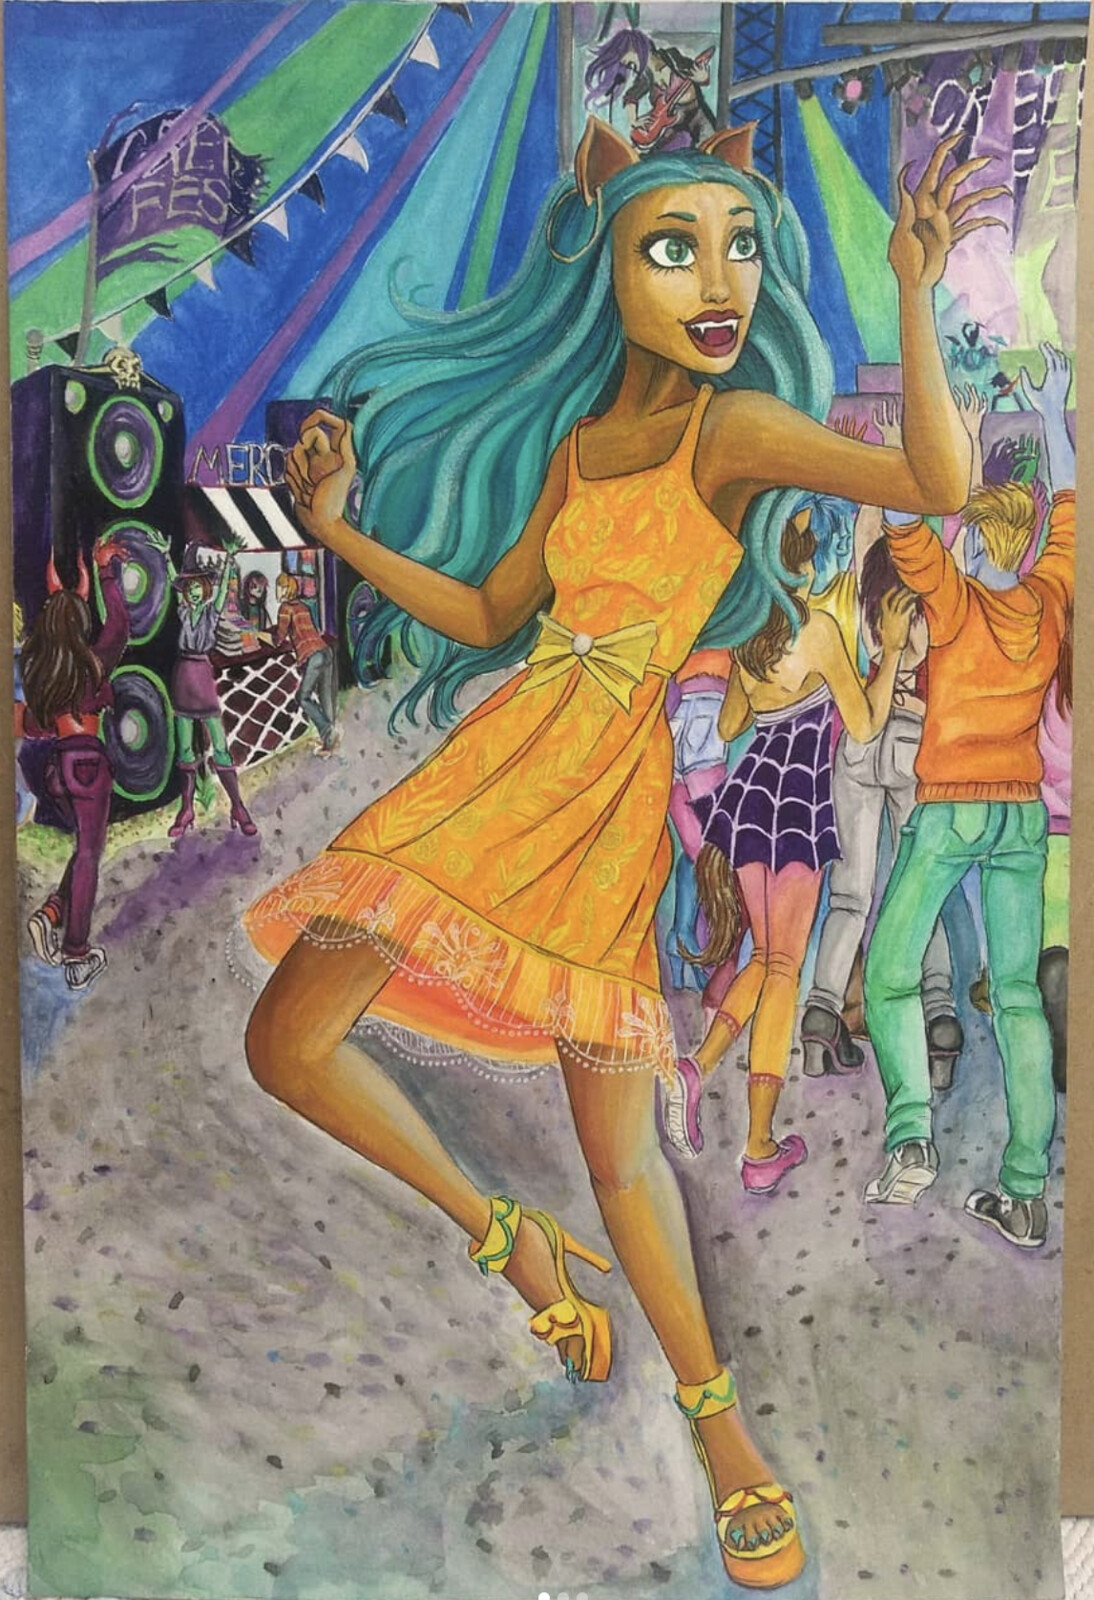 Werewolf with teal hair dancing at a music festival.